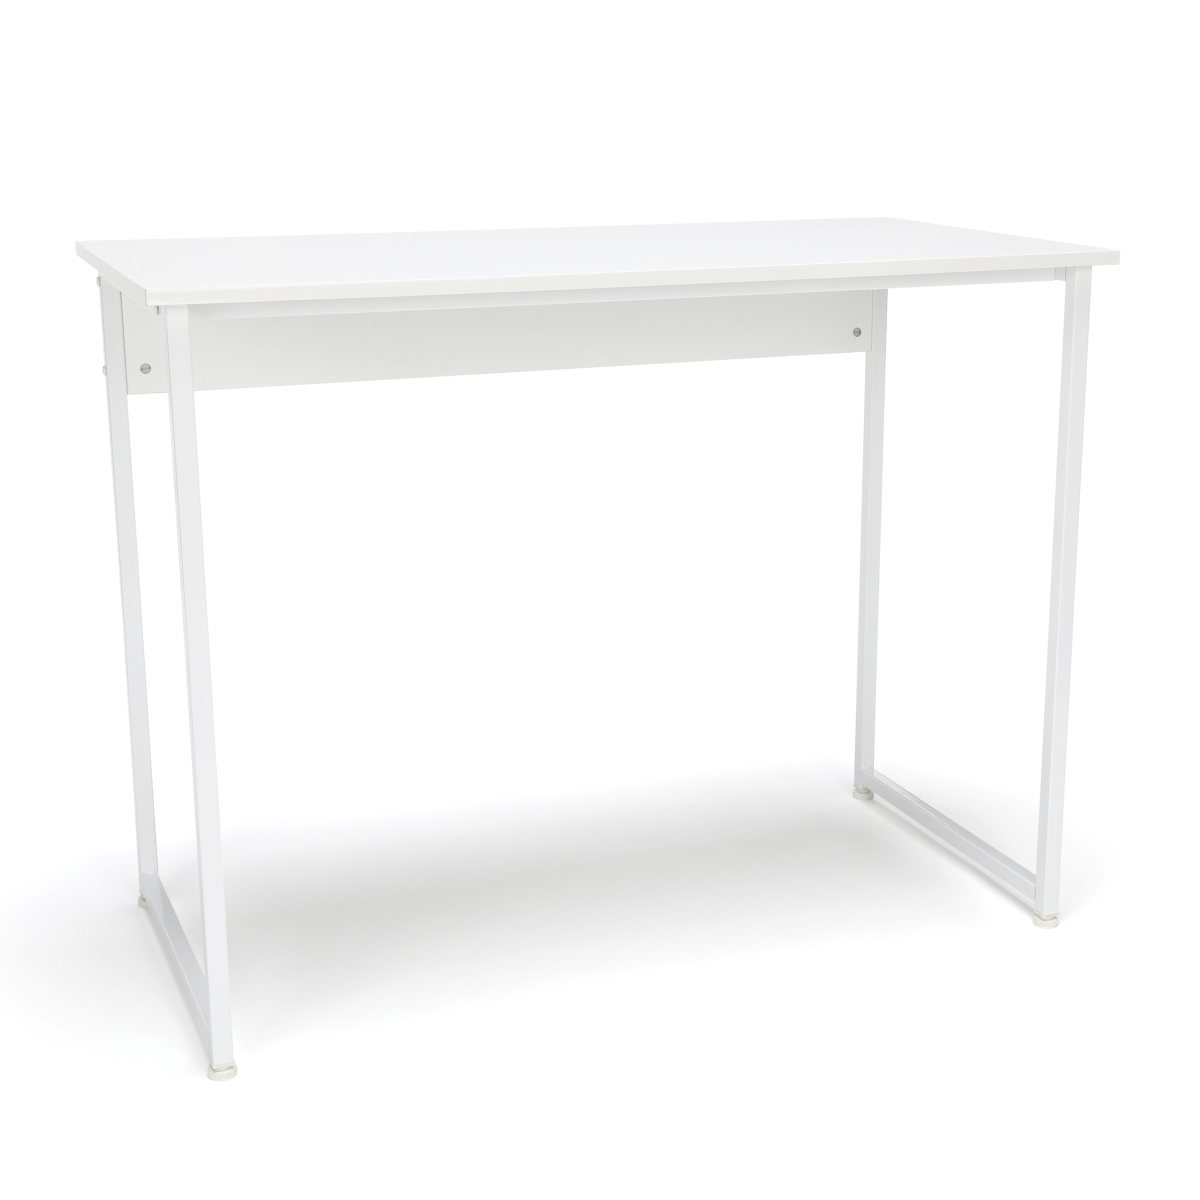 Ess-1040-wht-wht Office & Computer Desk & Workstation With Metal Legs, White With White Frame